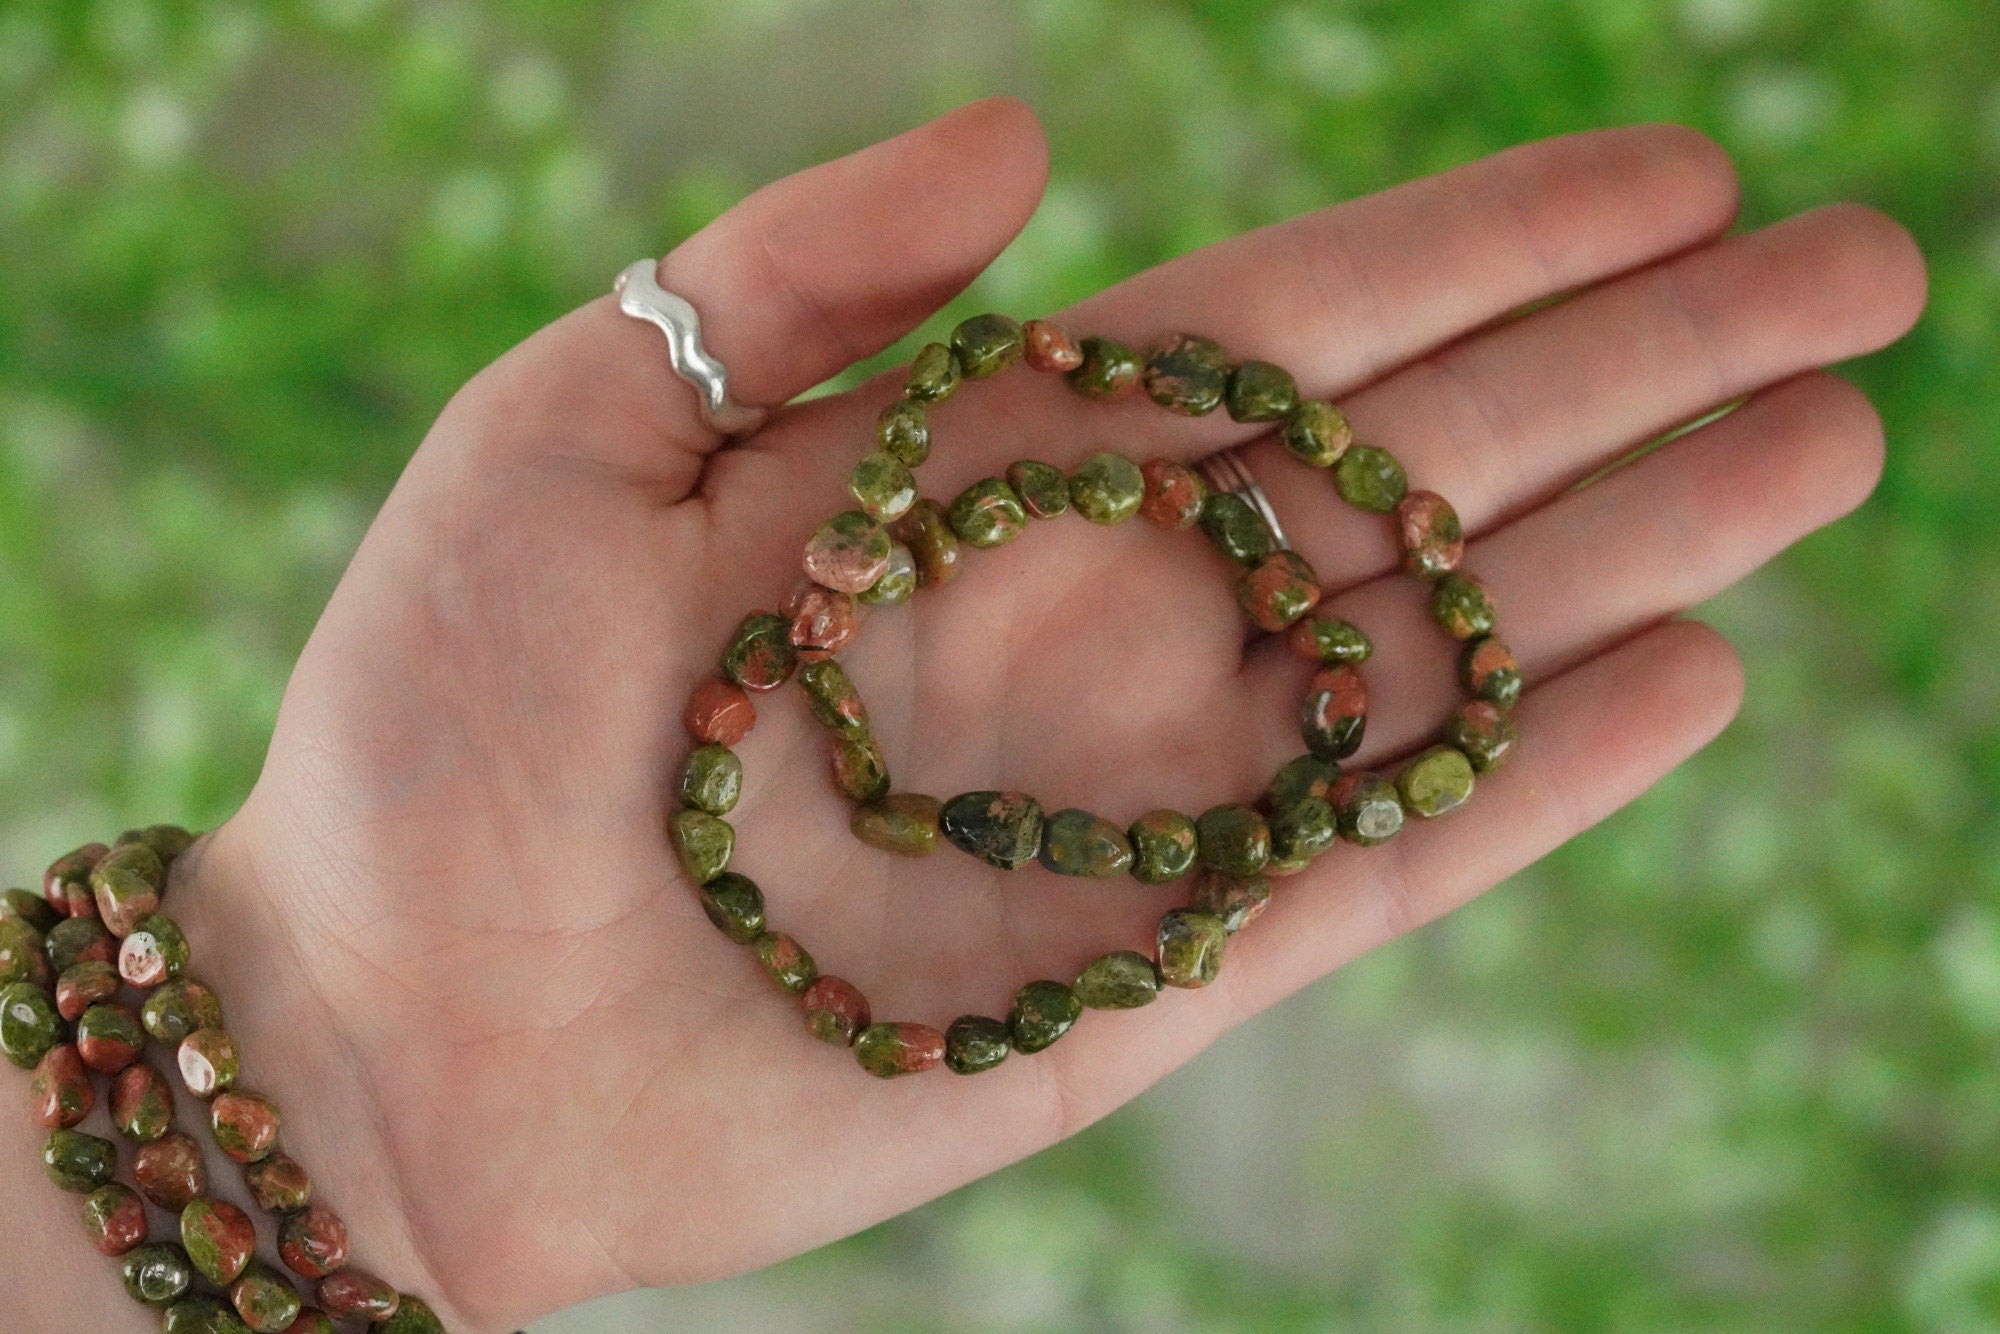 Amazon.com: Unakite Bracelet Natural Crystal Stone 6 mm Bead Bracelet Round  Shape for Reiki Healing and Crystal Healing Stone (Color : Green):  Clothing, Shoes & Jewelry